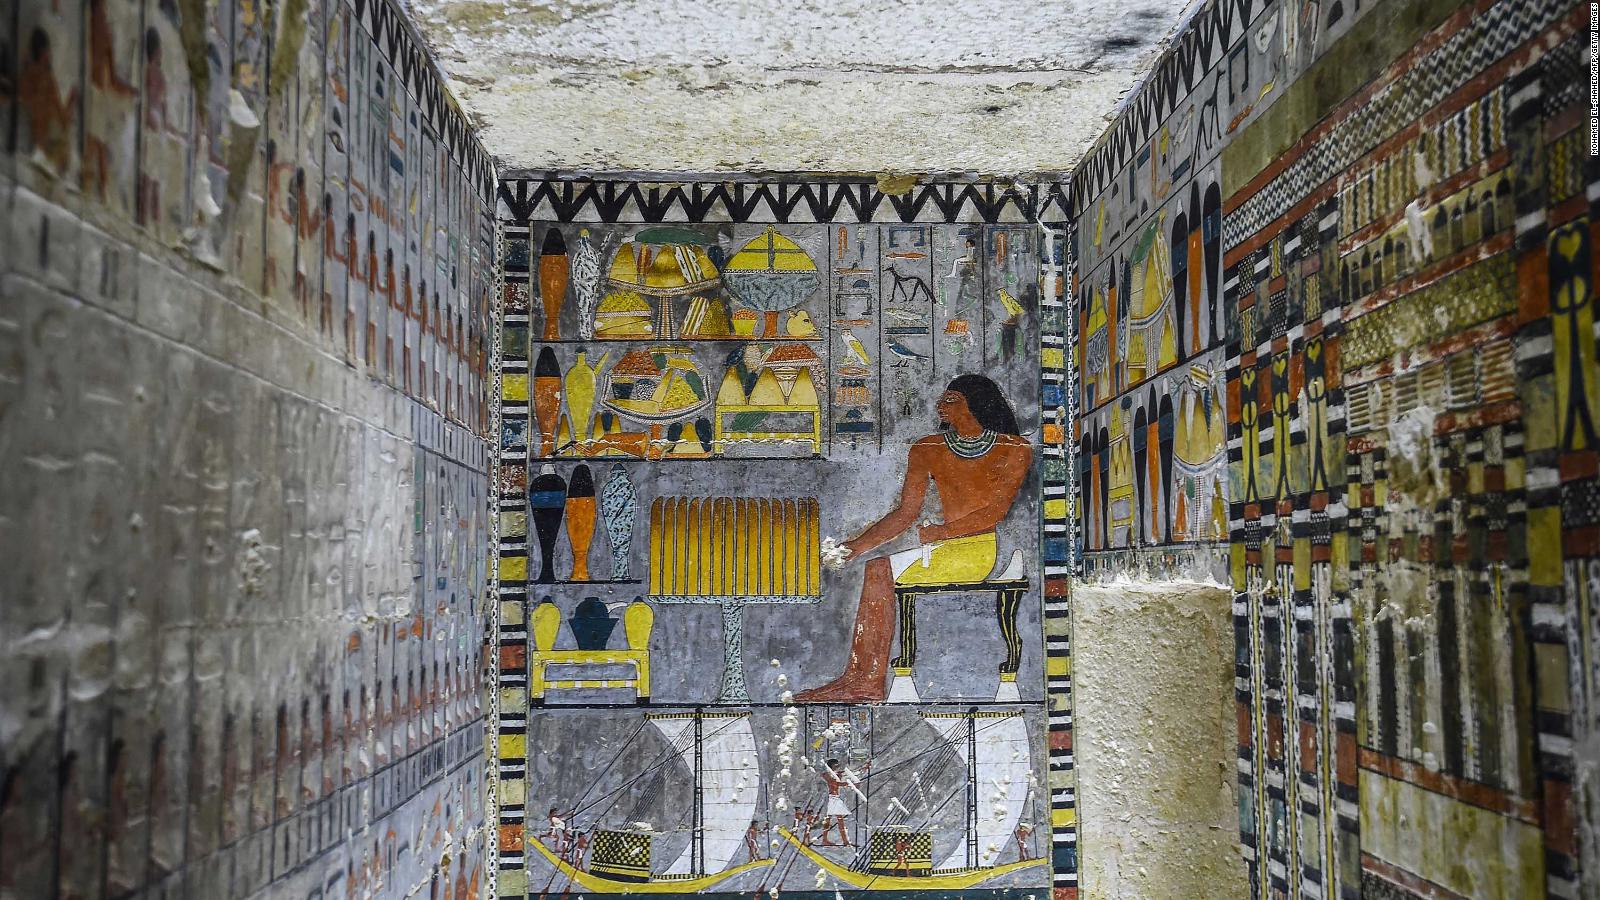 Colorful 4 000 Year Old Tomb Unveiled In Egypt Cnn Video